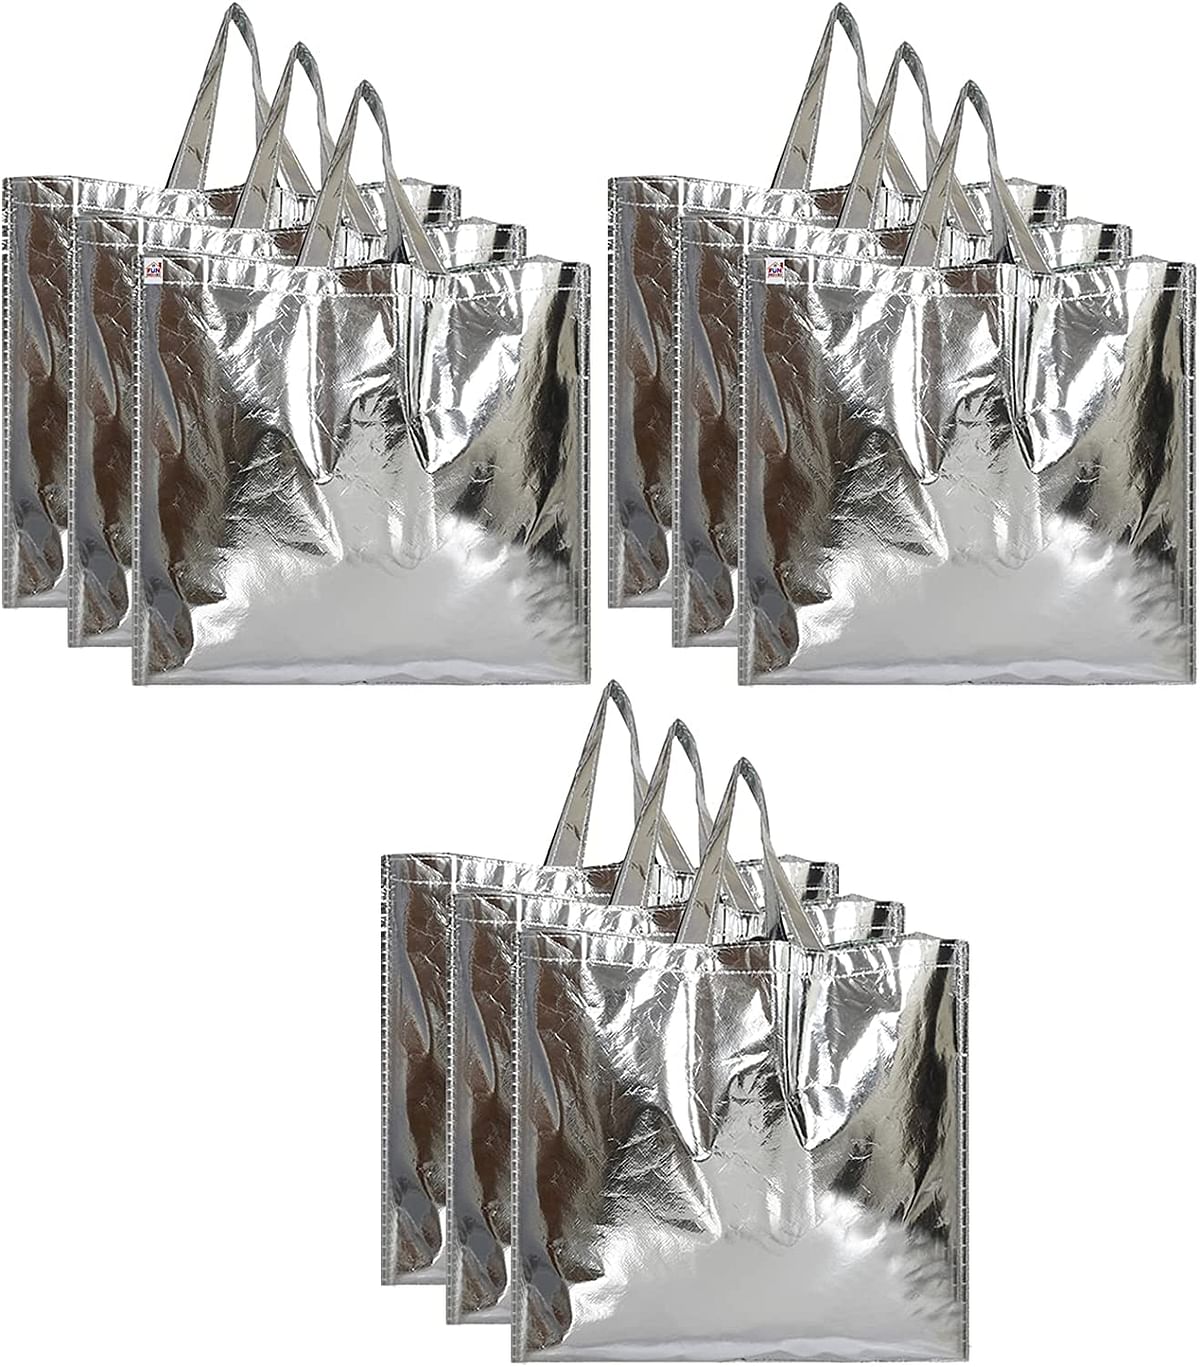 Fun Homes Reusable Small Size Grocery Bag Shopping Bag with Handle, Non-woven Gift Bag Goodies Bag Silver Tote Bag-Pack of 9 (Silver)